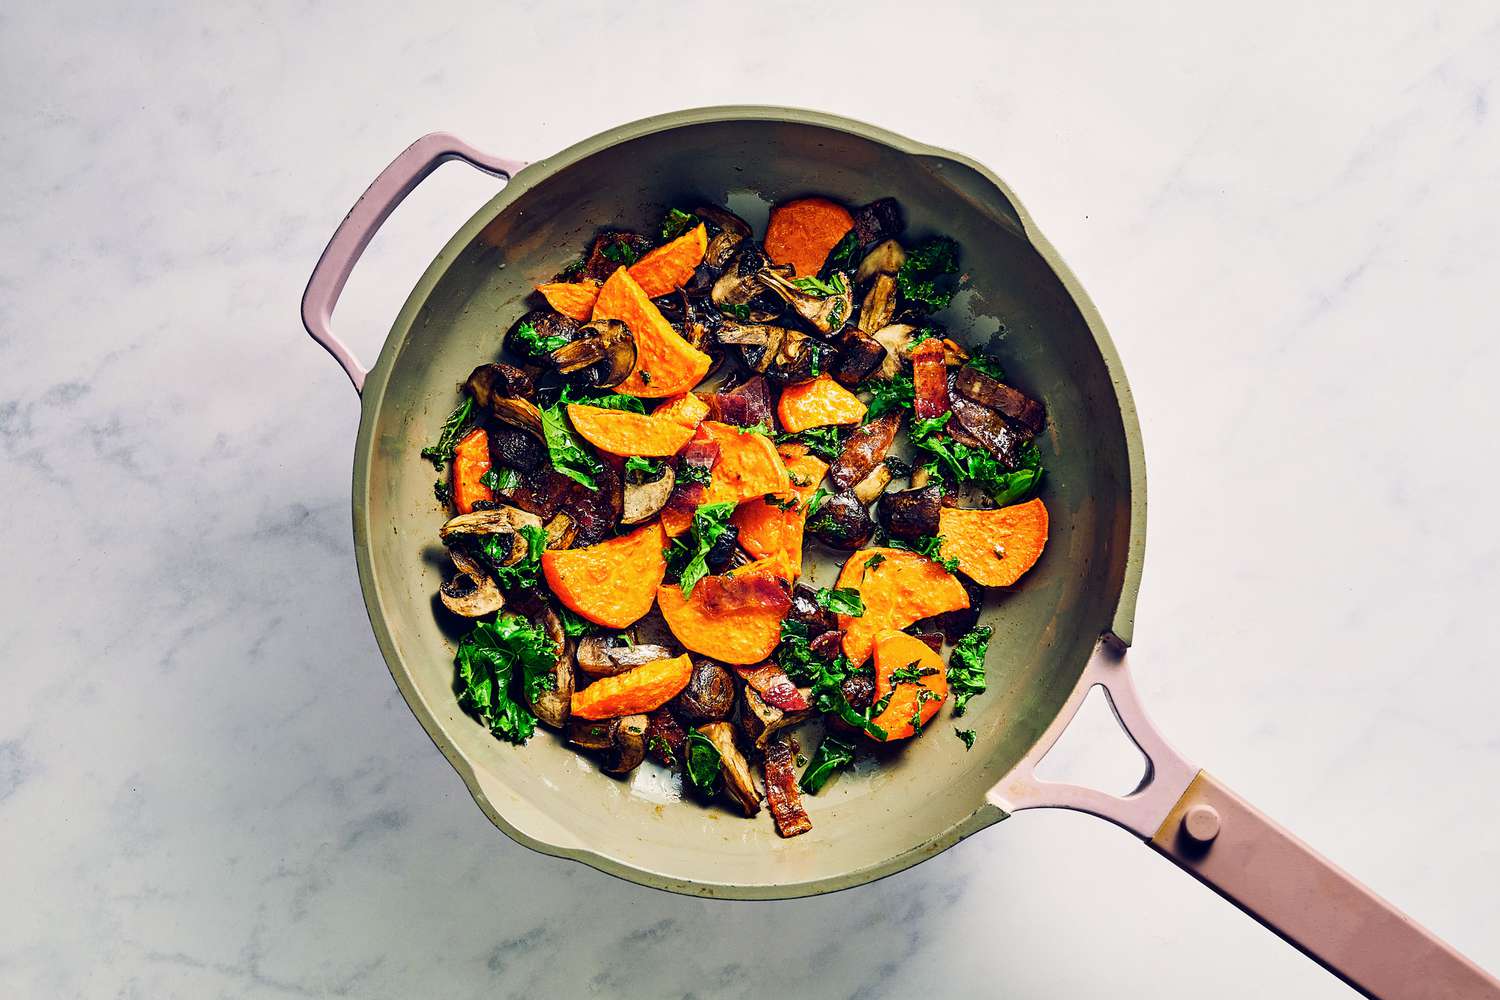 A small skillet with roasted mushrooms, roasted sweet potatoes, chopped kale, and million dollar bacon pieces